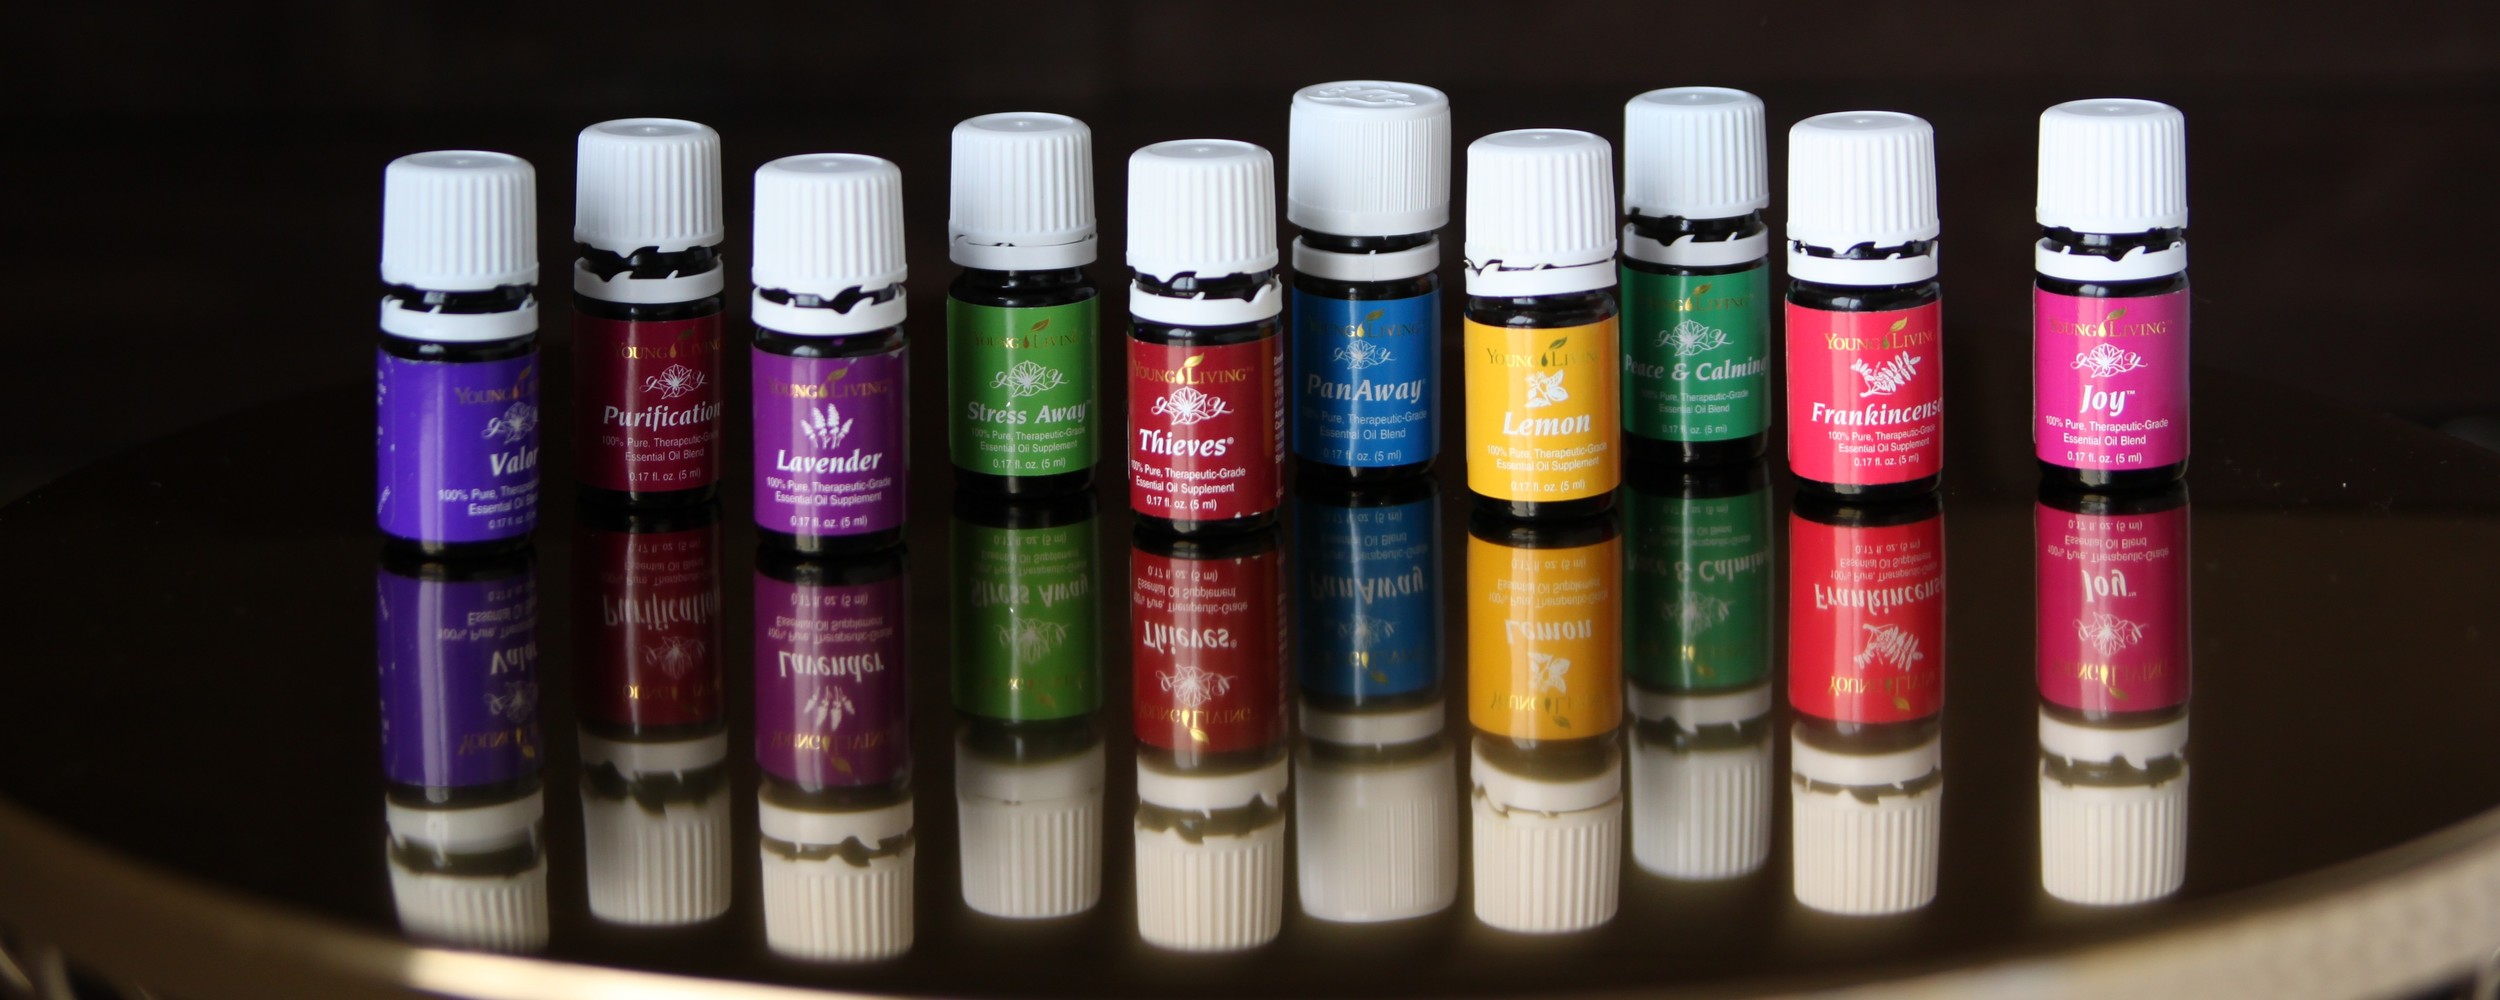 How We Use Essential Oils